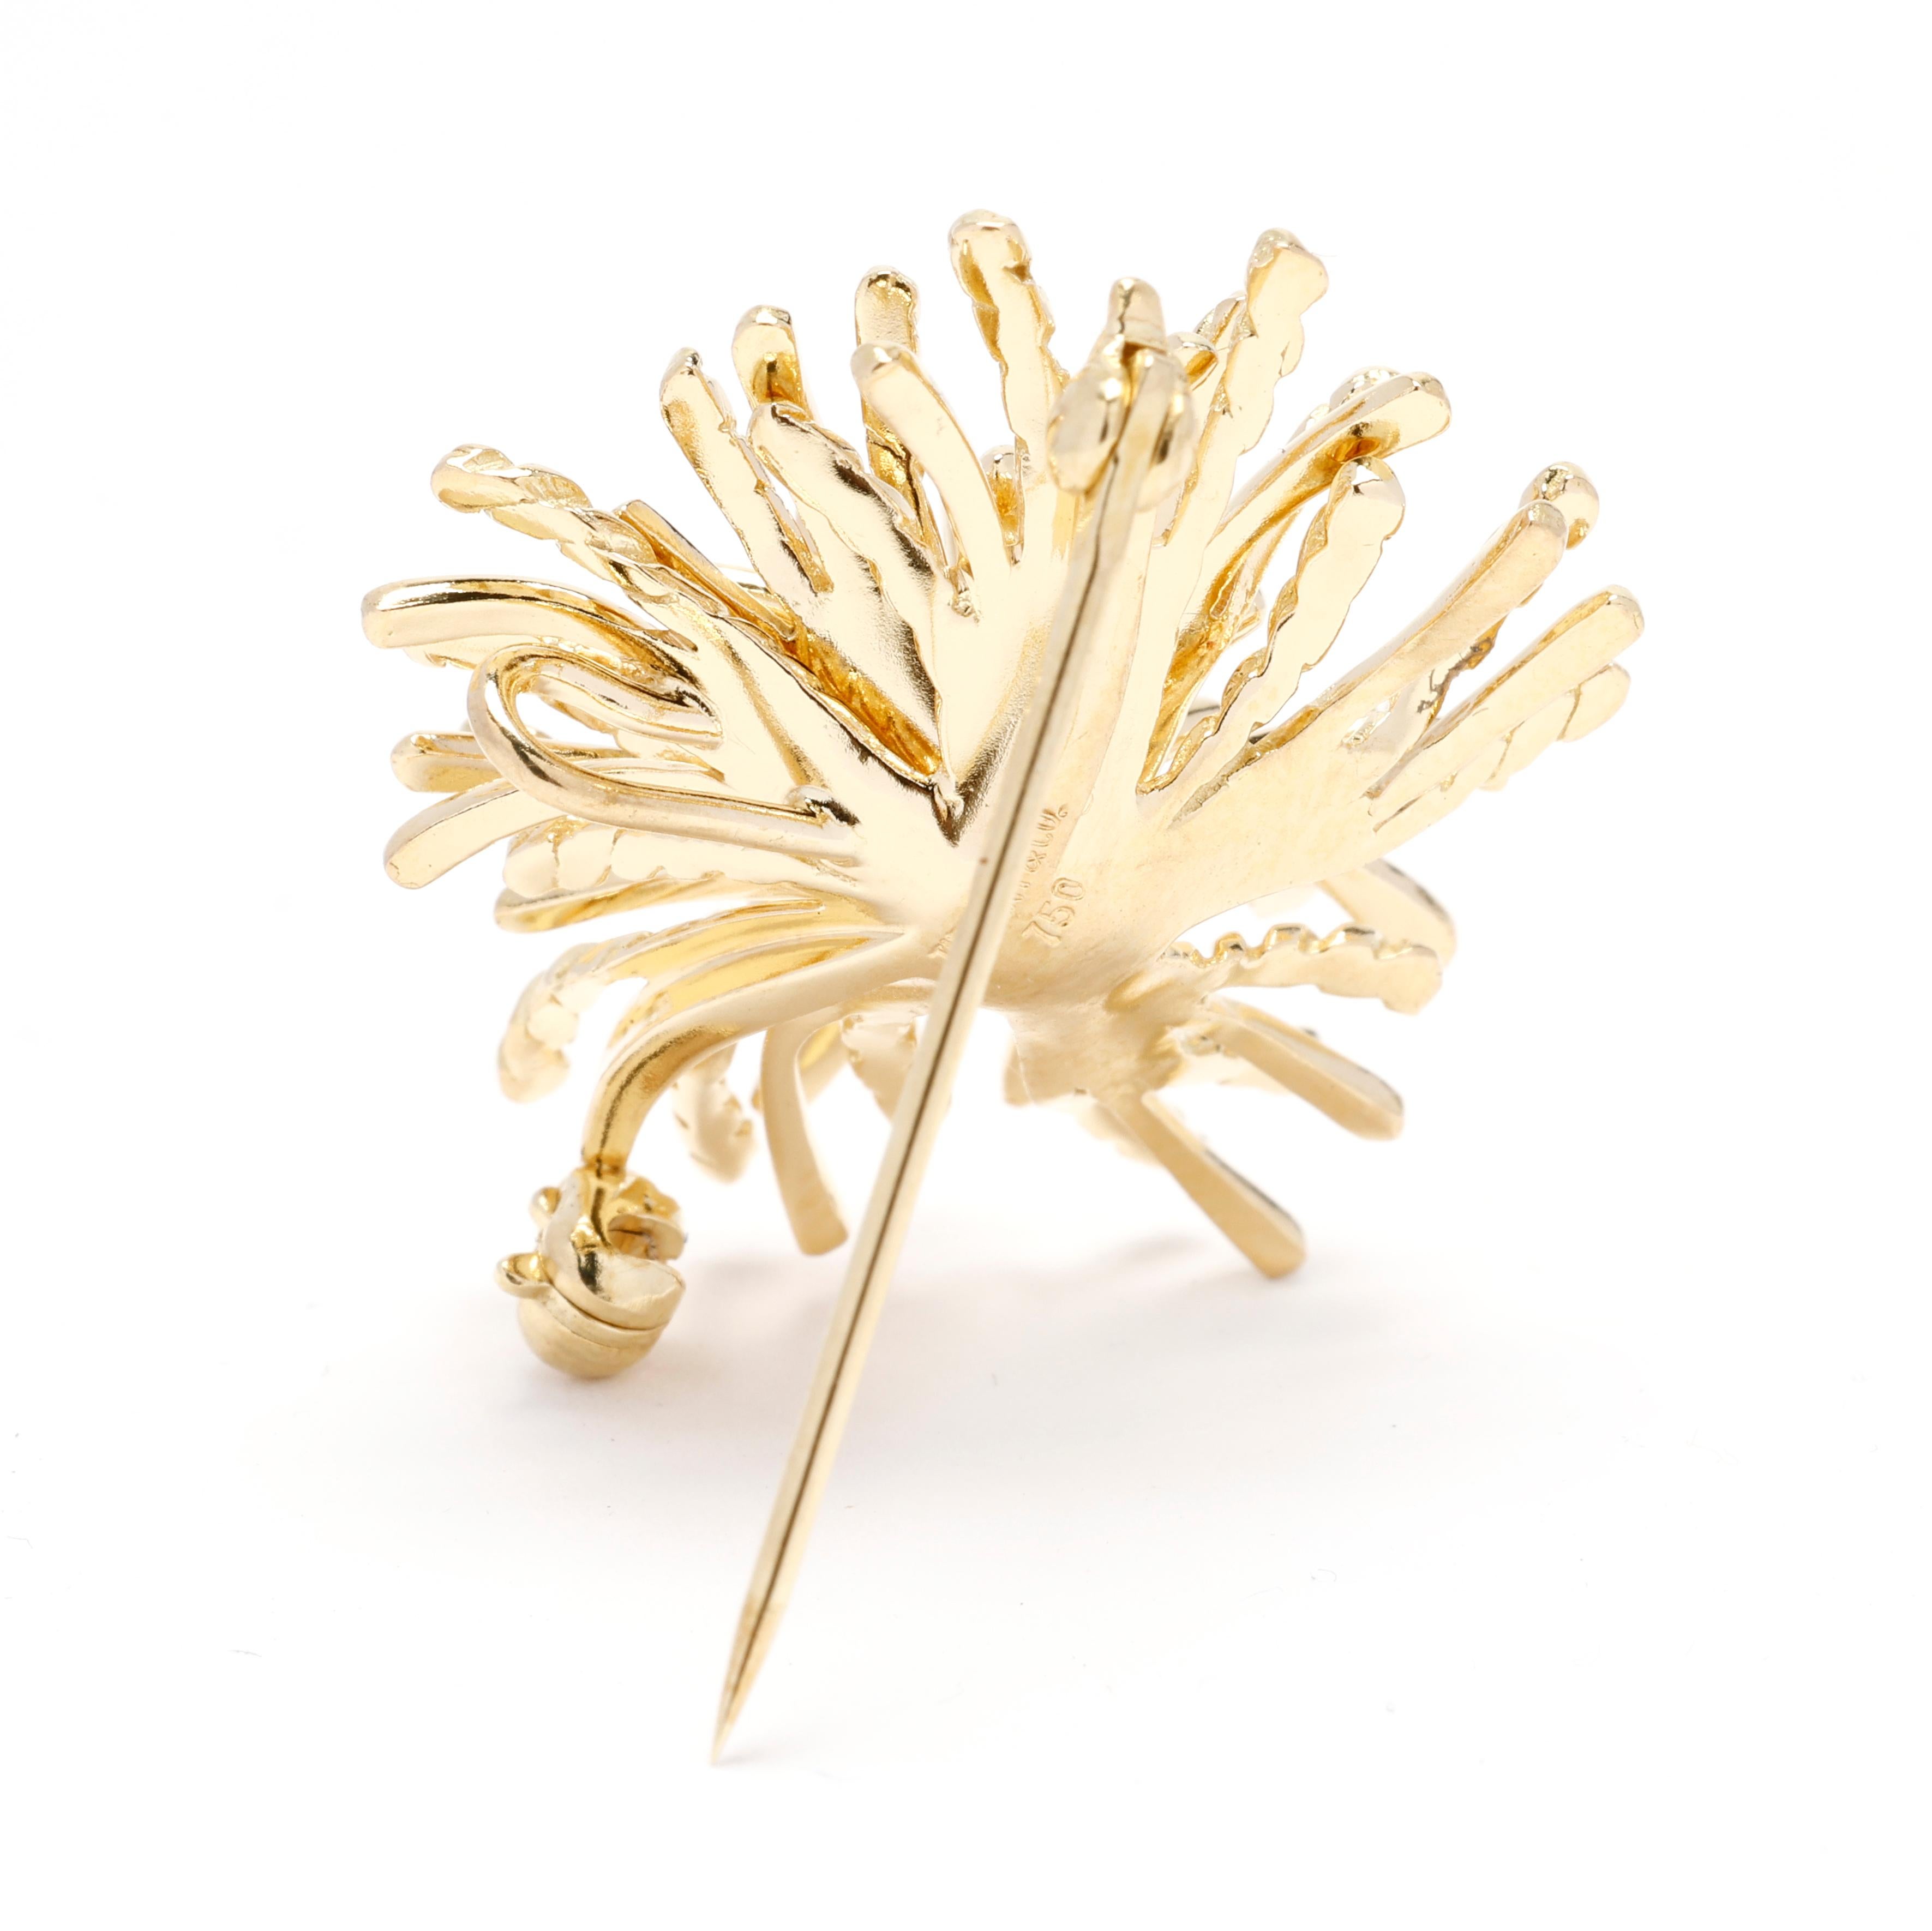 Tiffany & Co. Gold Anemone Brooch, 18k Yellow Gold, Statement Designer Piece  In Good Condition For Sale In McLeansville, NC